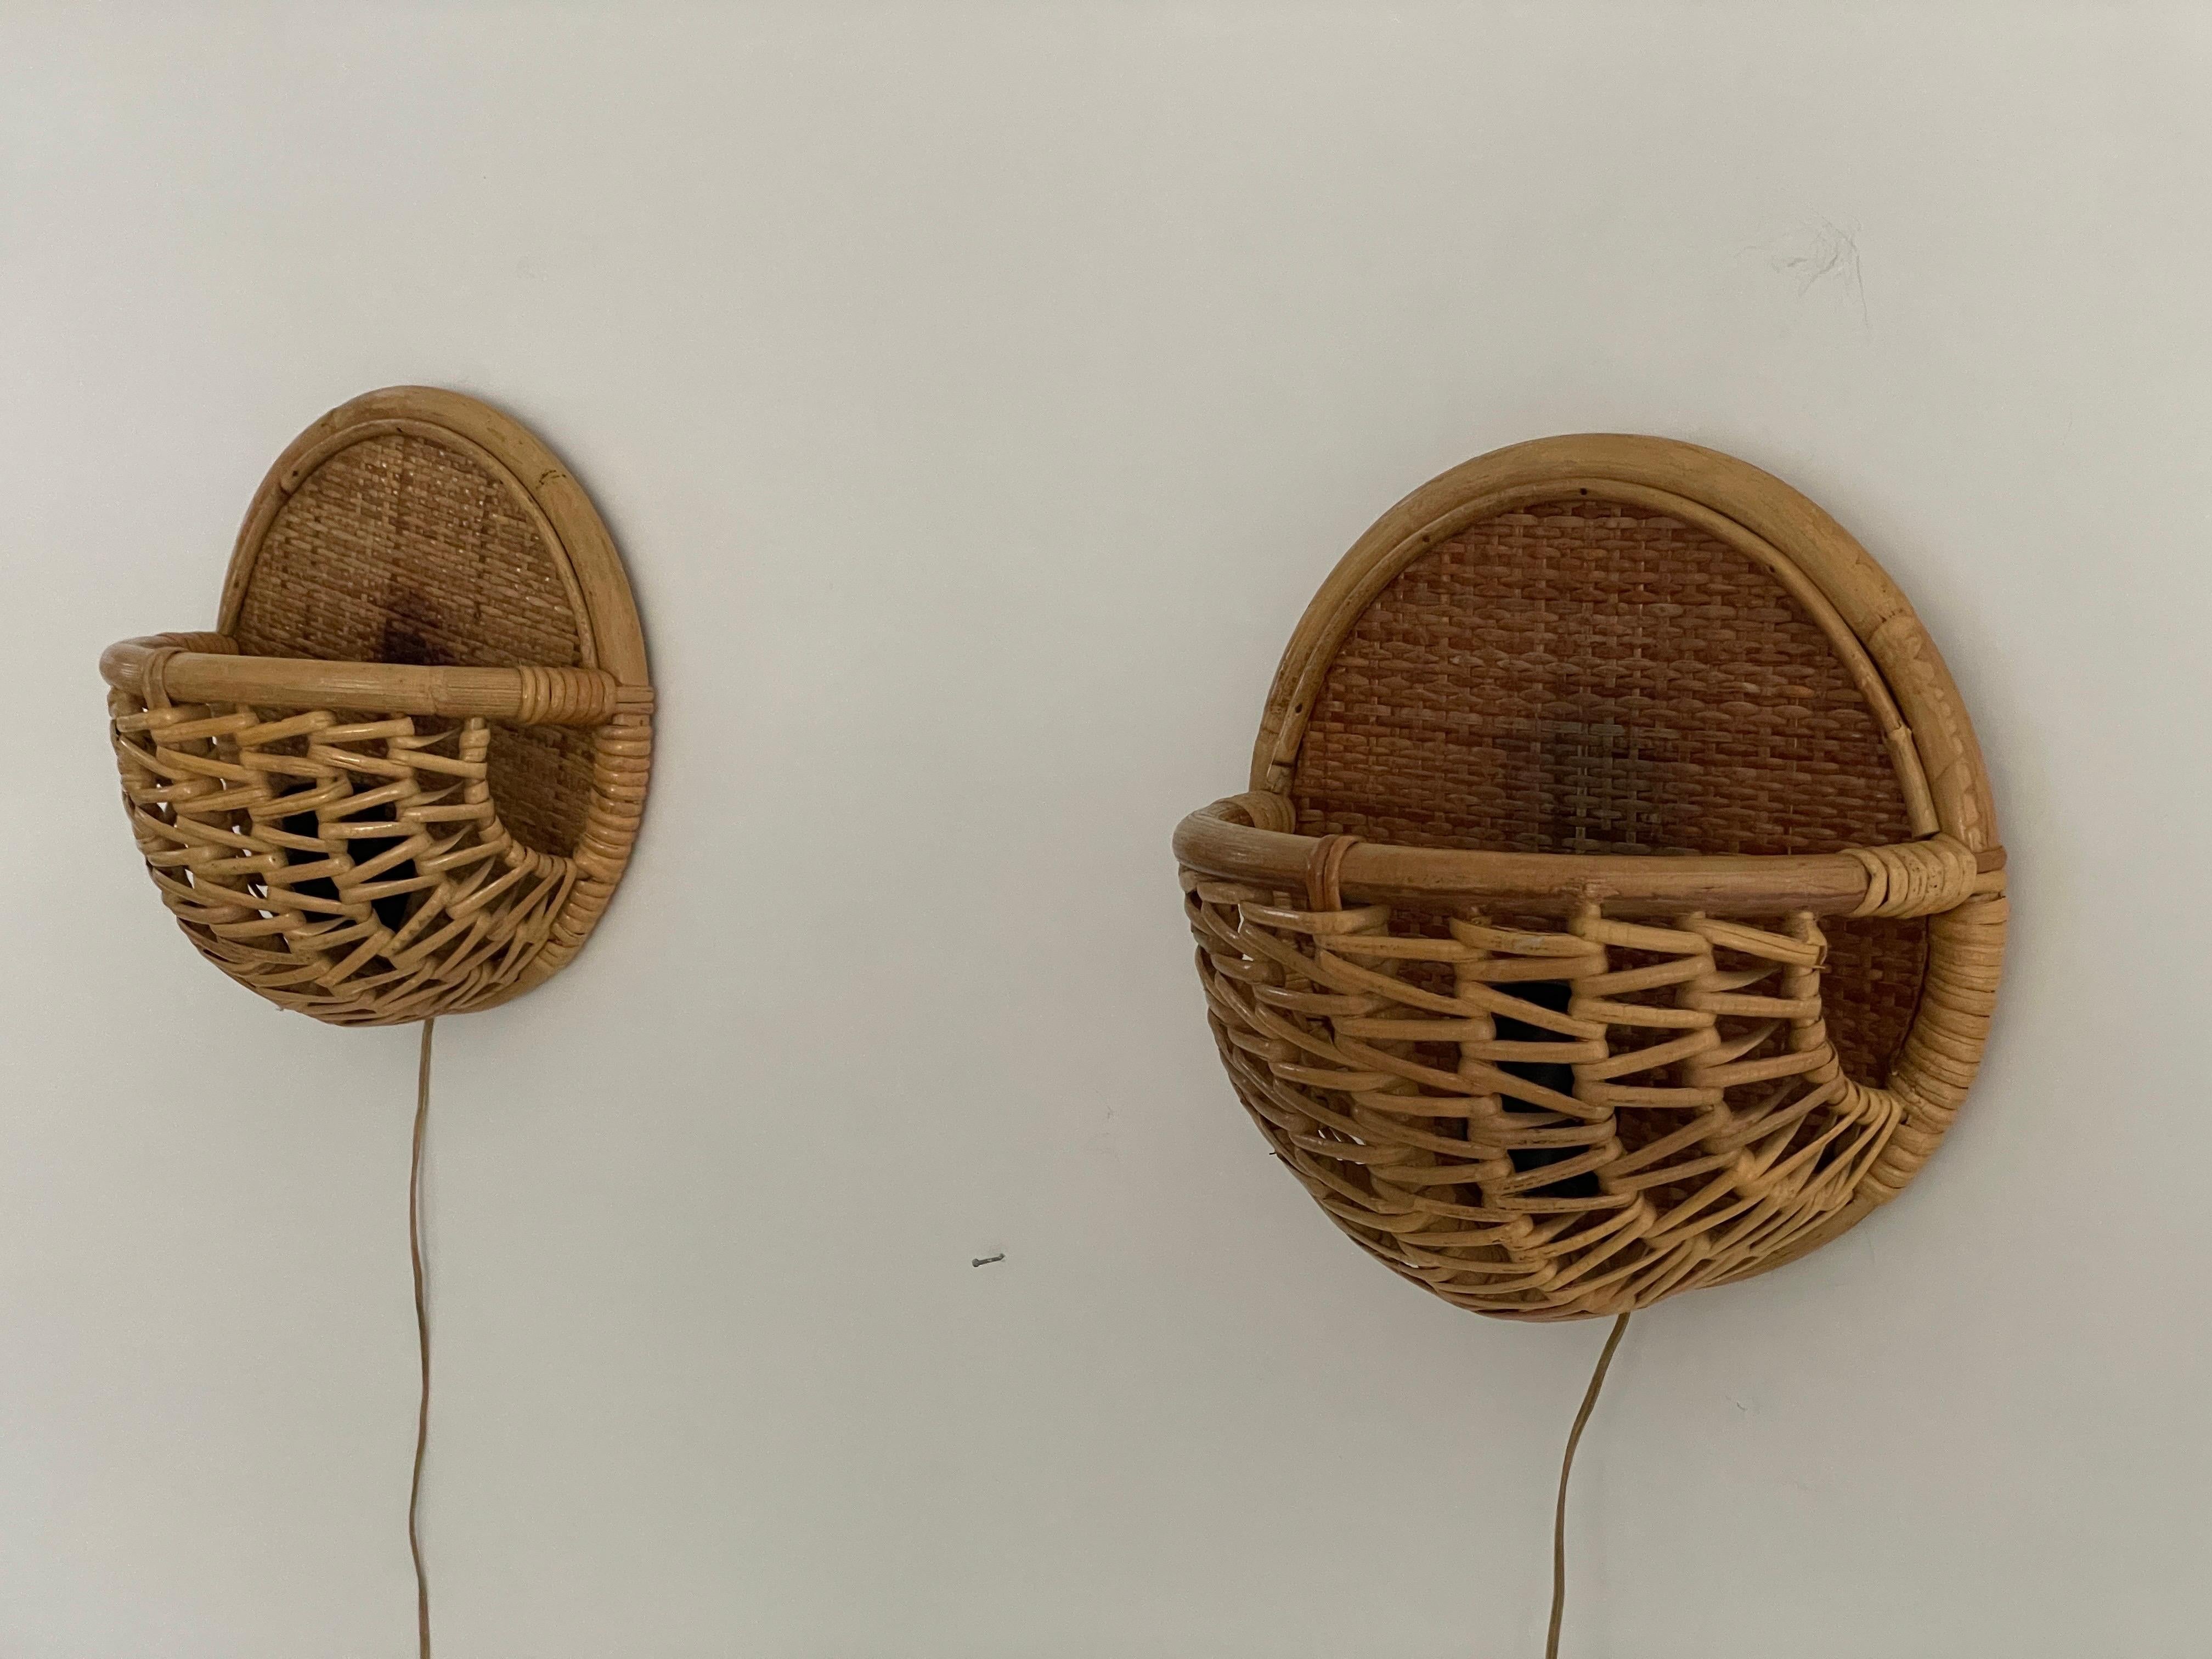 Italian Wicker and Bamboo Round Design Pair of Wall Lamps, 1950s, Italy For Sale